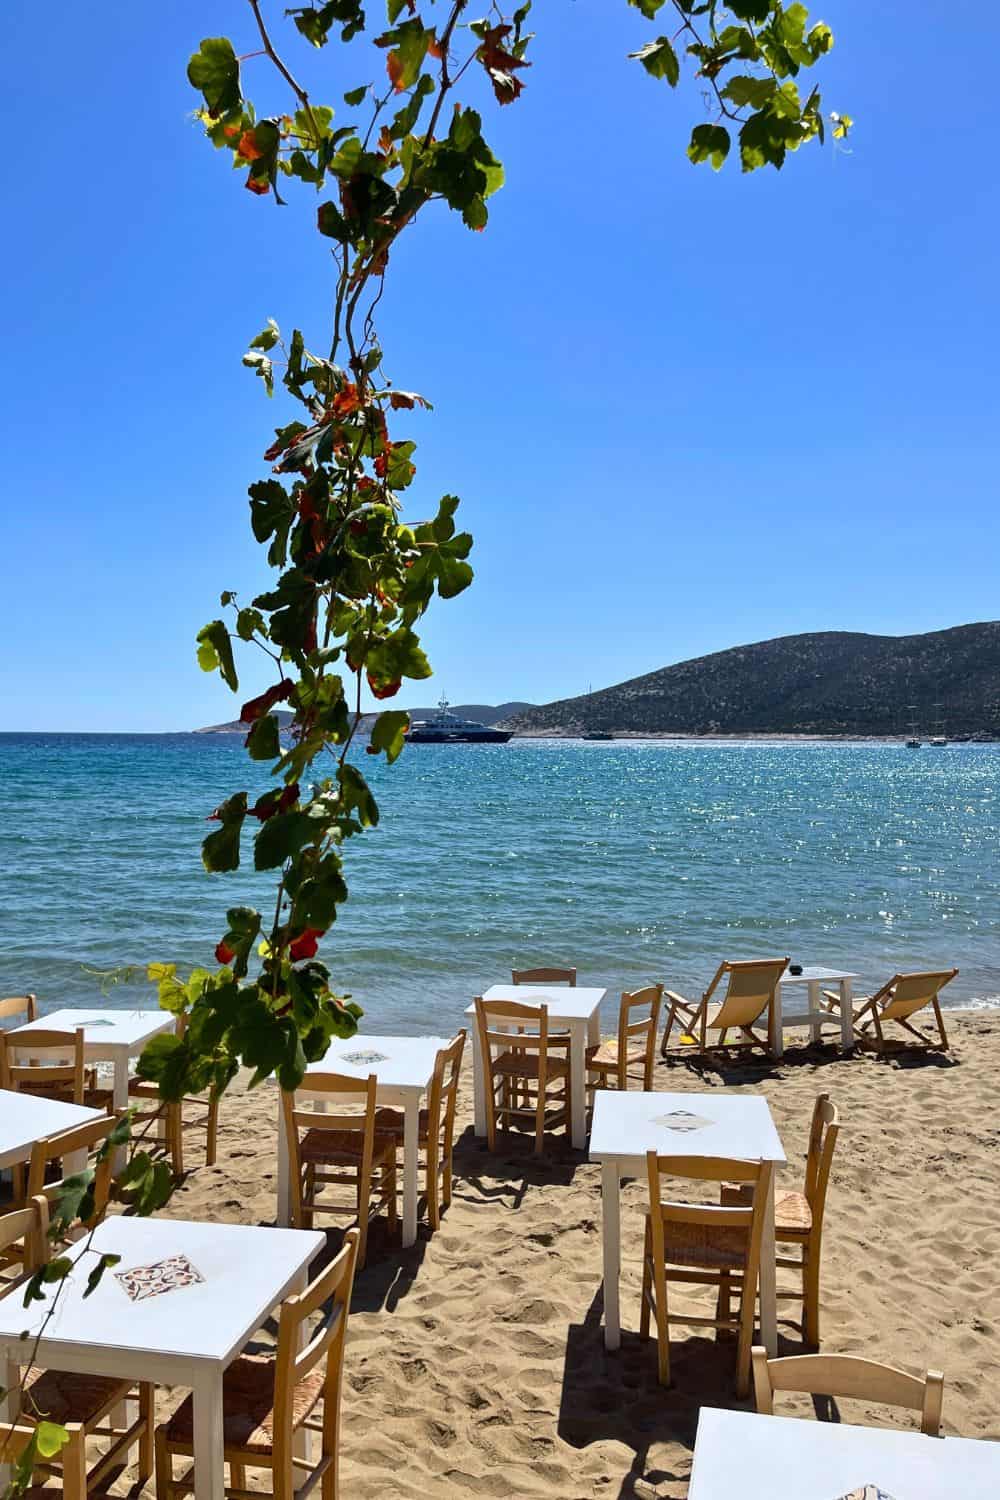 A serene beach dining scene with wooden tables and chairs set up on sandy shores, under the gentle shade of grapevine leaves, with a clear view of the sparkling blue sea and a yacht in the distance, inviting a relaxed, coastal dining experience.